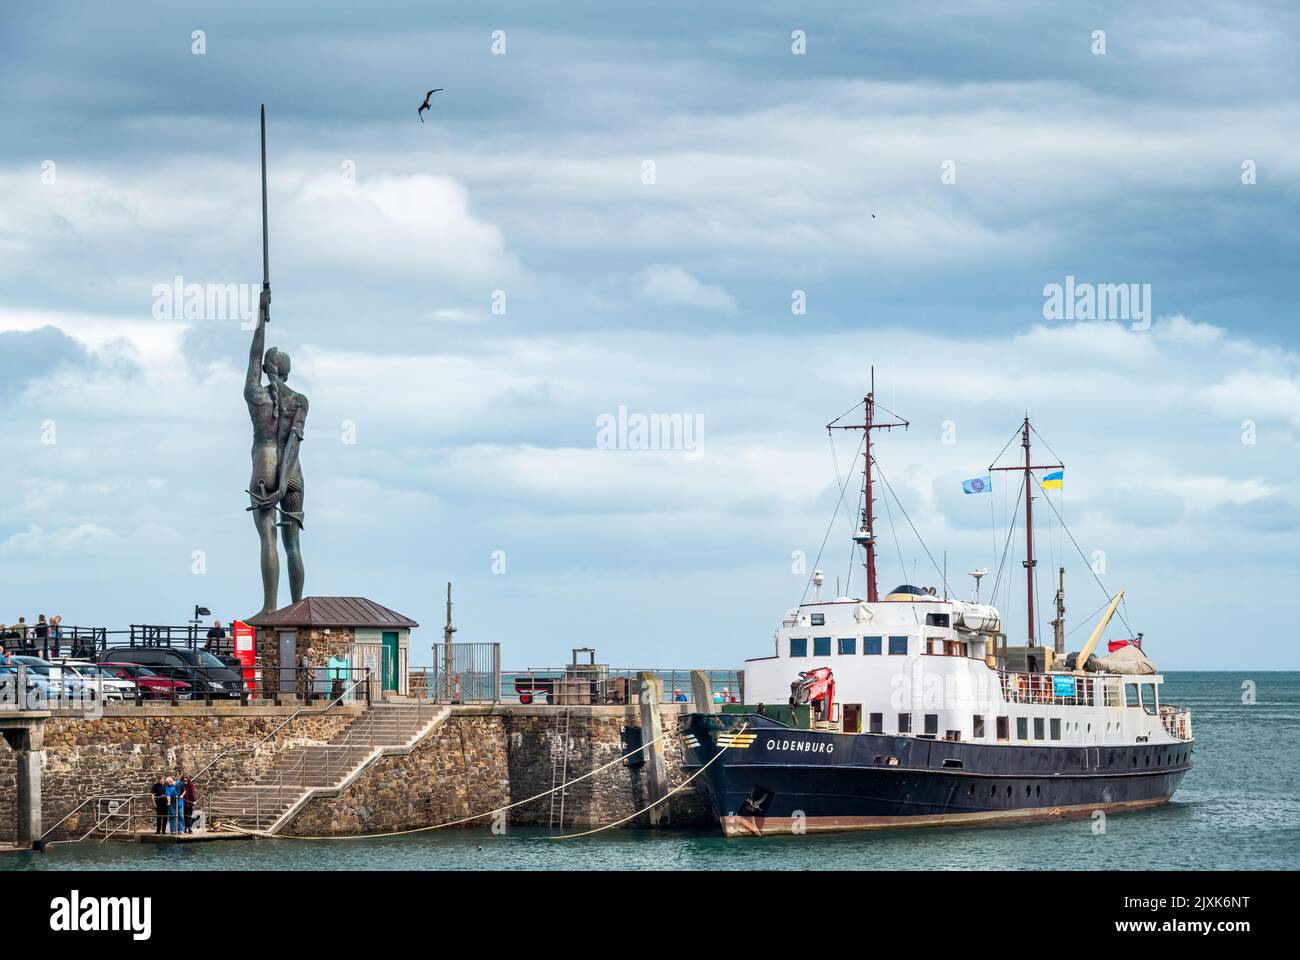 The Lundy Island supply vessel and passenger ship MV Oldenburg moored alongside the quay, with the famous Damien Hirst statue Verity in the background Stock Photo